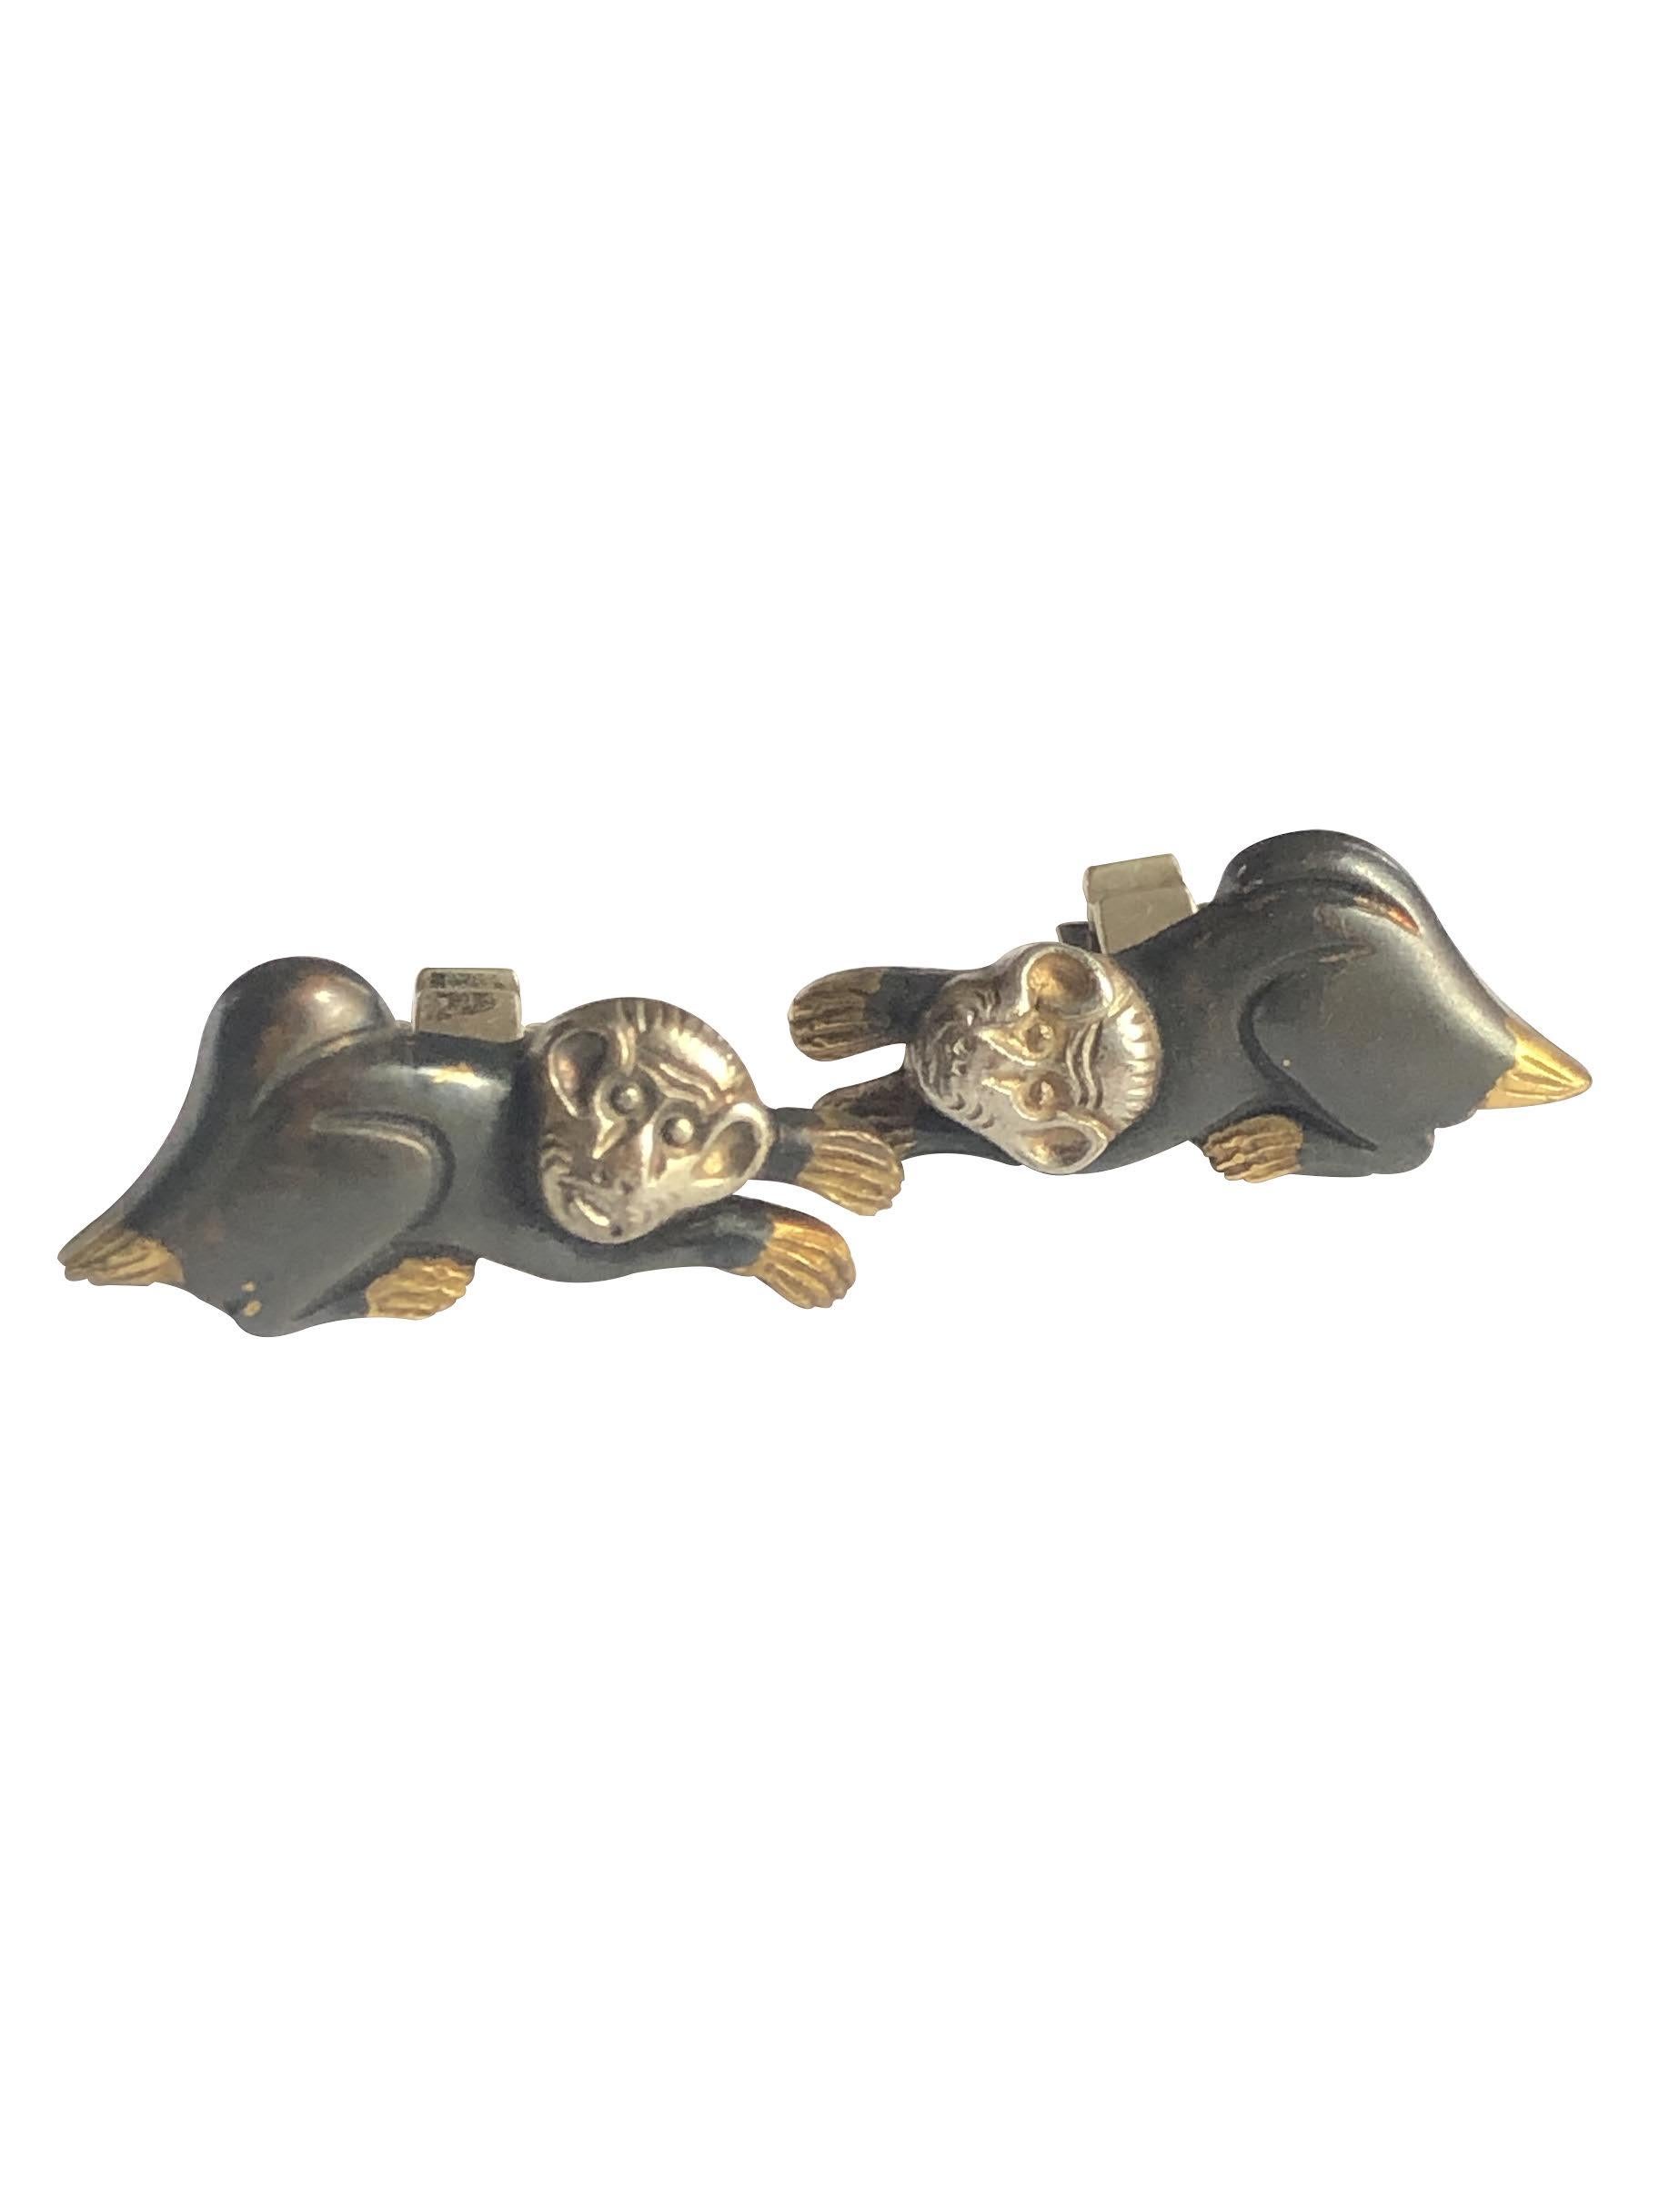 Circa 1900 Shakudo Cufflinks, in the form of Monkeys and made of a mix of Copper, Bronze, silver, these original were probably decorations on a ceremonial Sword or other item and then made into Cufflinks at a later date, measuring 1 1/4 inches in